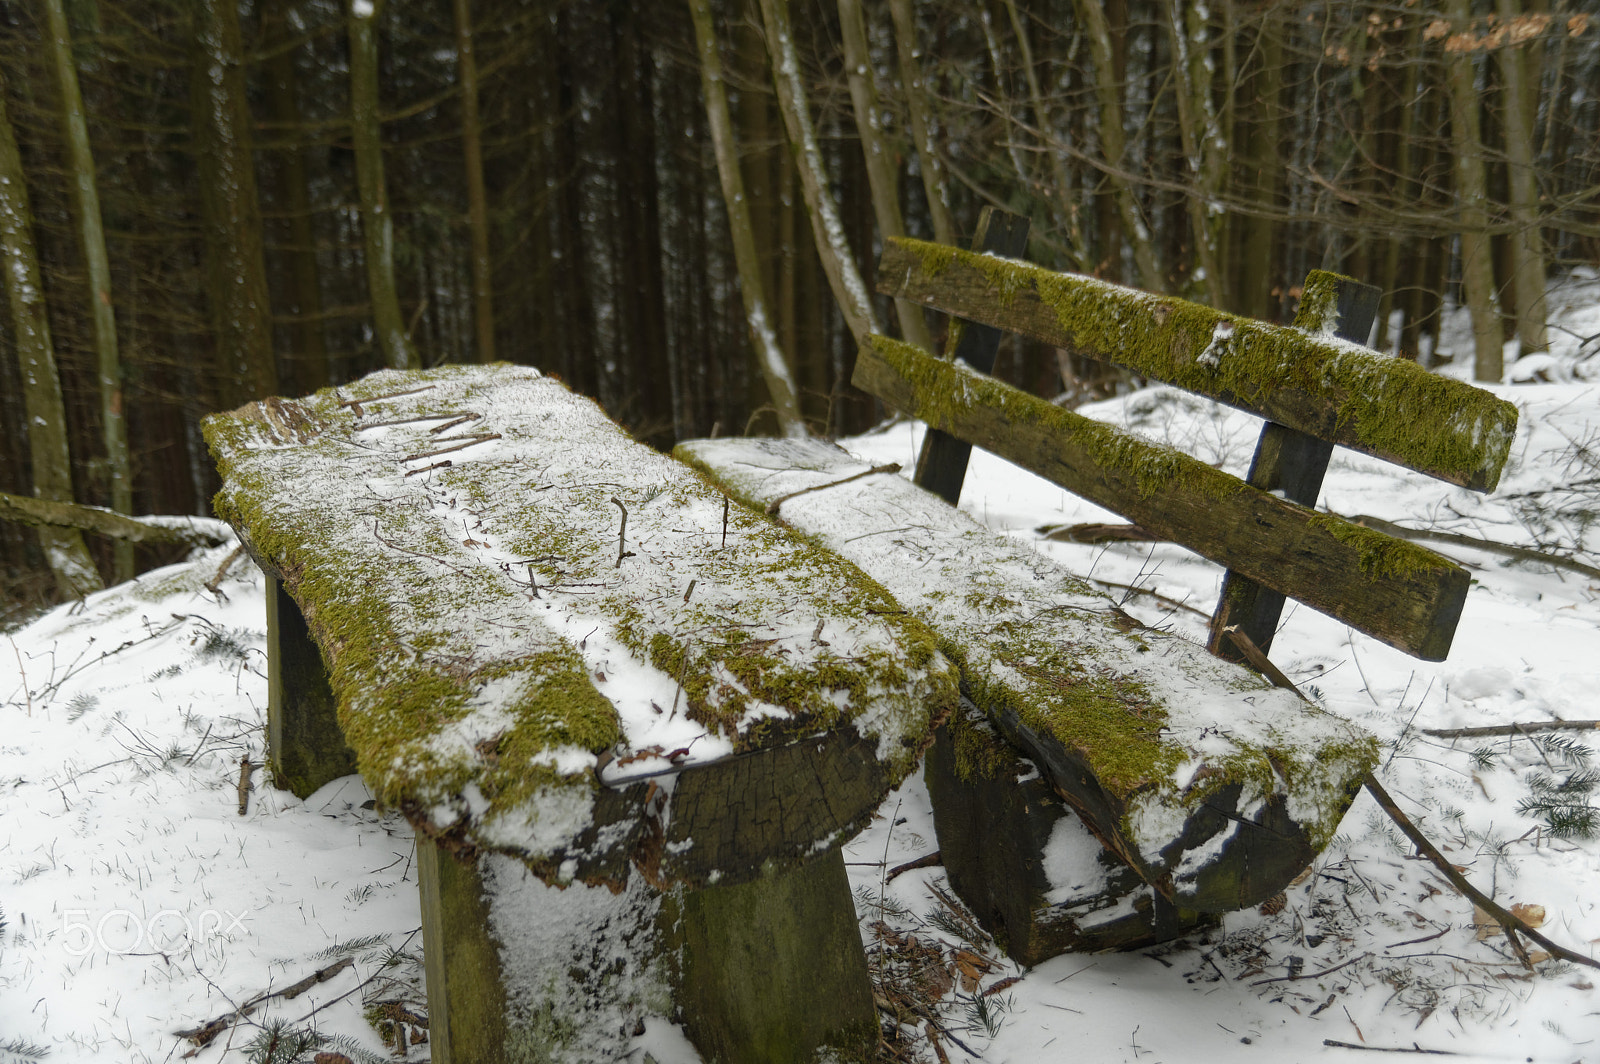 Nikon D3200 + Tamron SP AF 17-50mm F2.8 XR Di II LD Aspherical (IF) sample photo. Mossy relax place photography